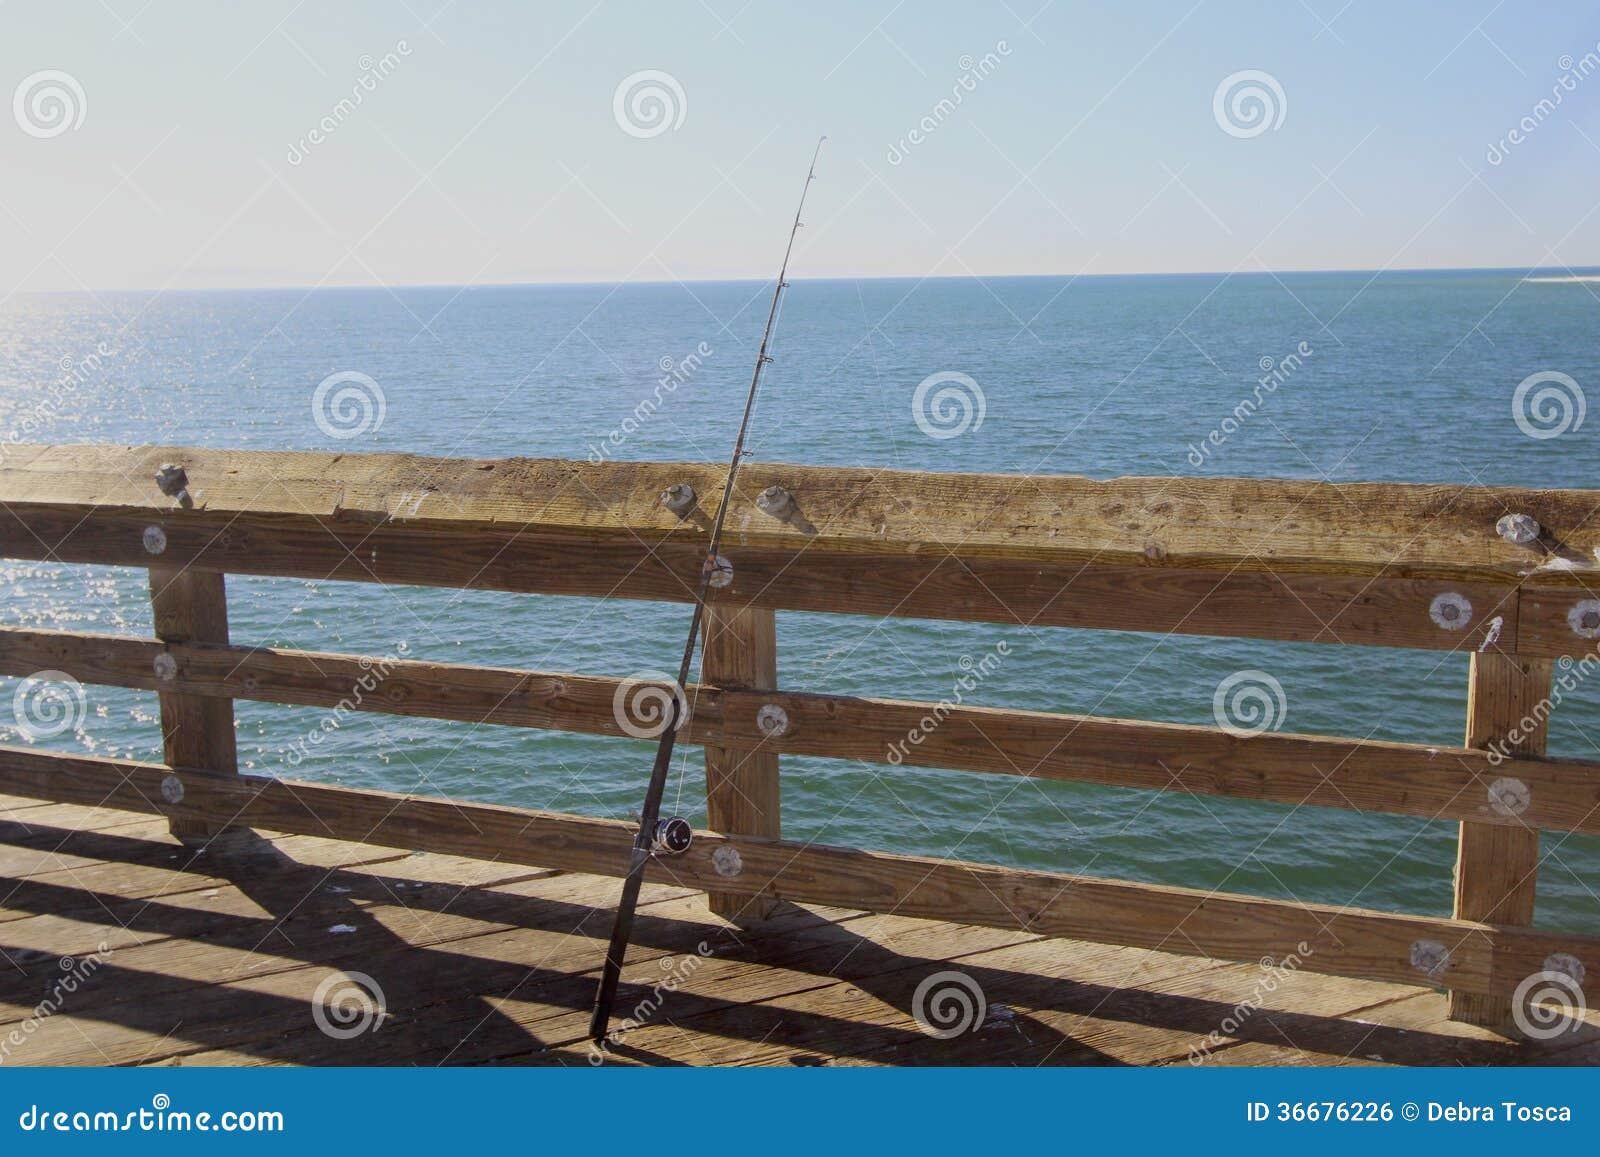 Fishing pole on the pier stock photo. Image of food, sport - 36676226